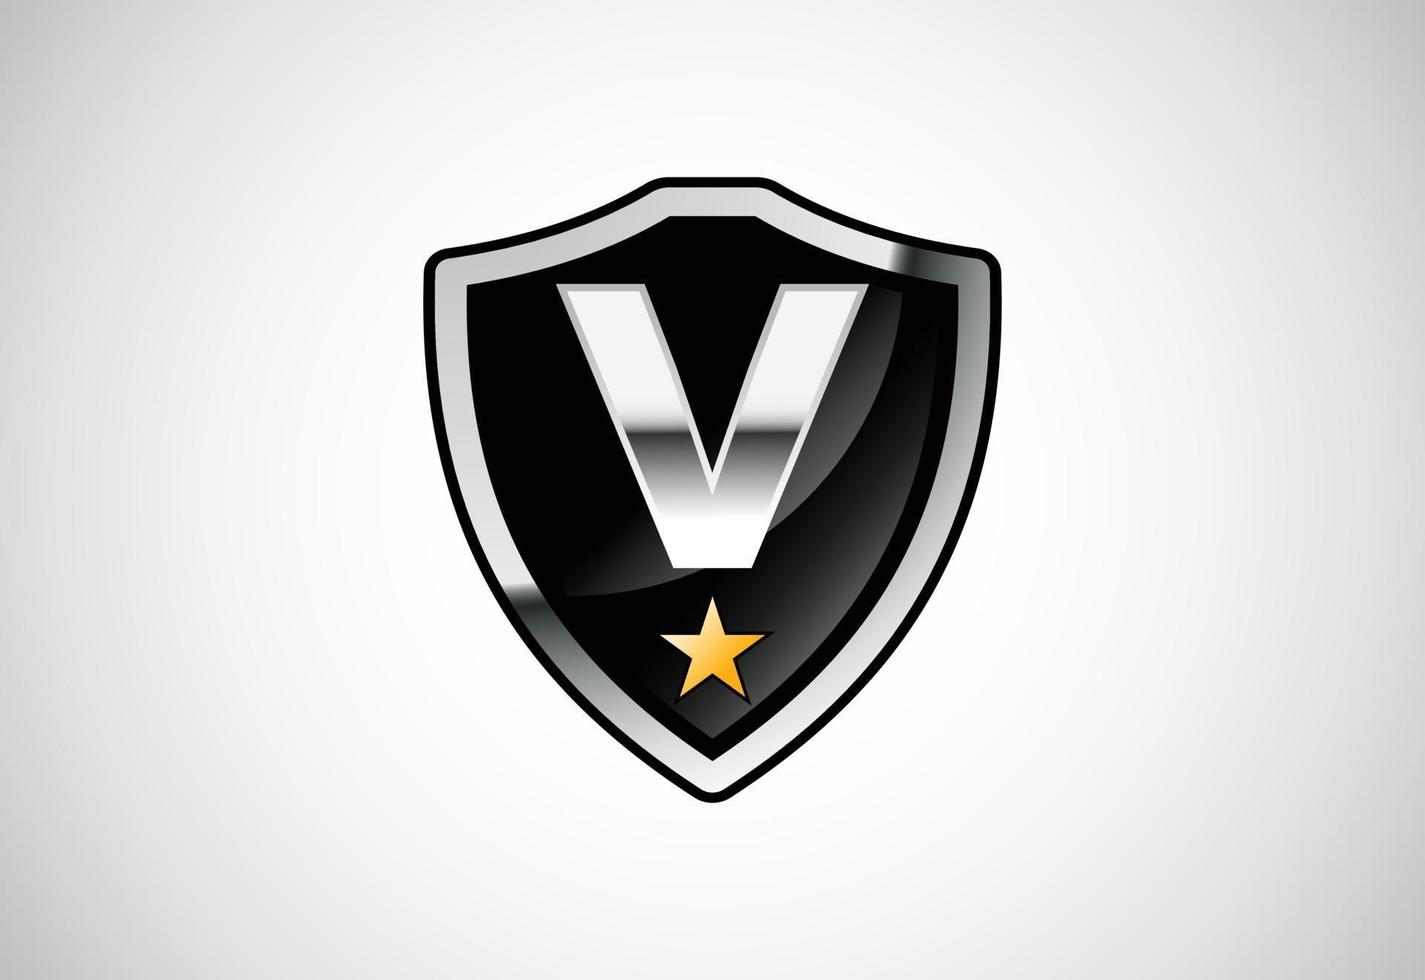 Initial letter V with shield icon logo design vector illustration. Shield with monogram alphabet